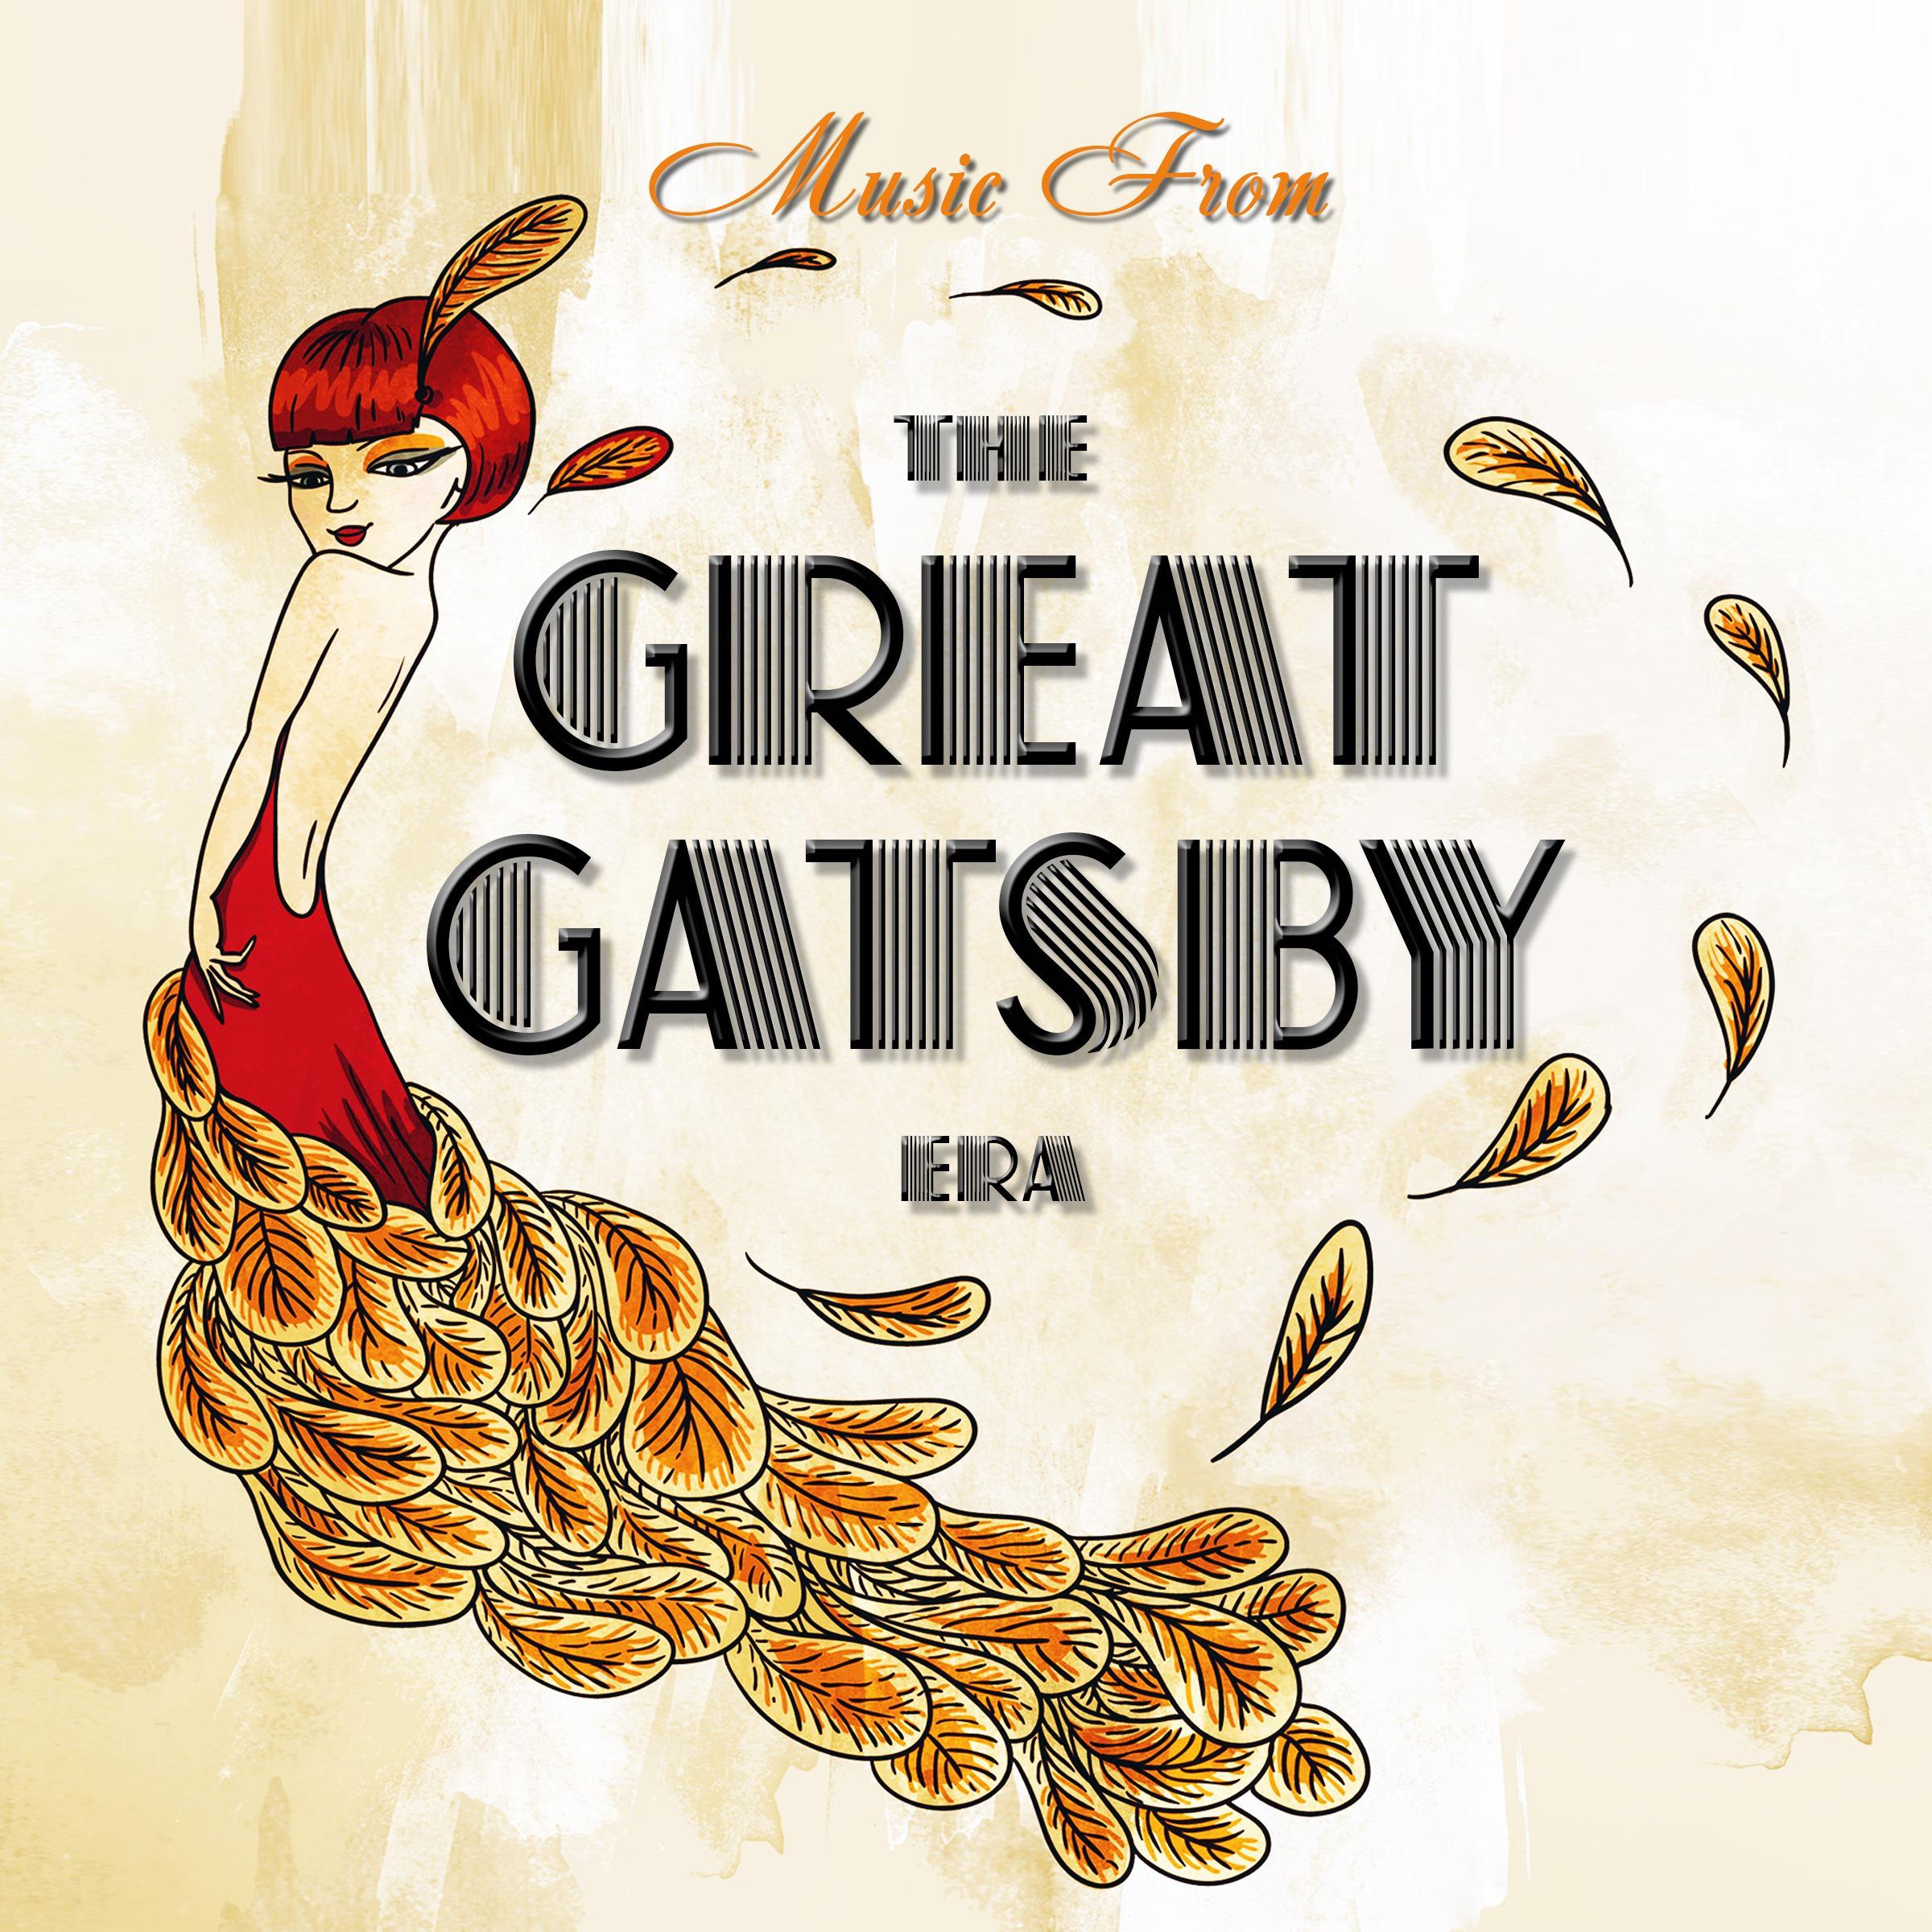 Music from the Great Gatsby Era